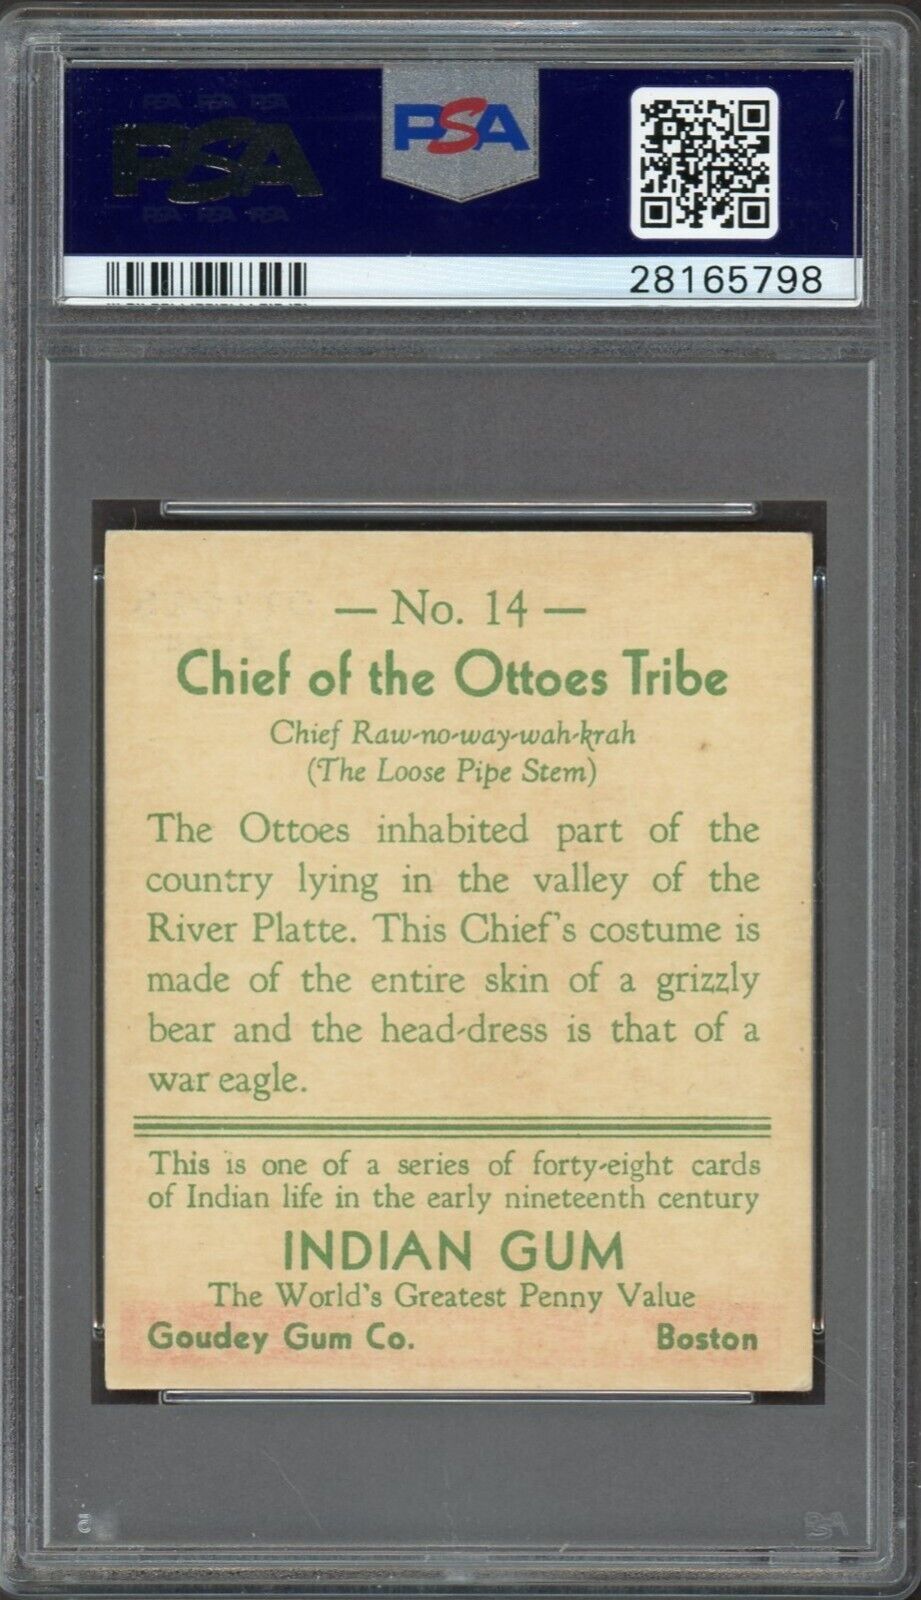 1933 Goudey INDIAN GUM (Series of 48) #14 Chief of the Ottoes Tribe (PSA 5 EX)